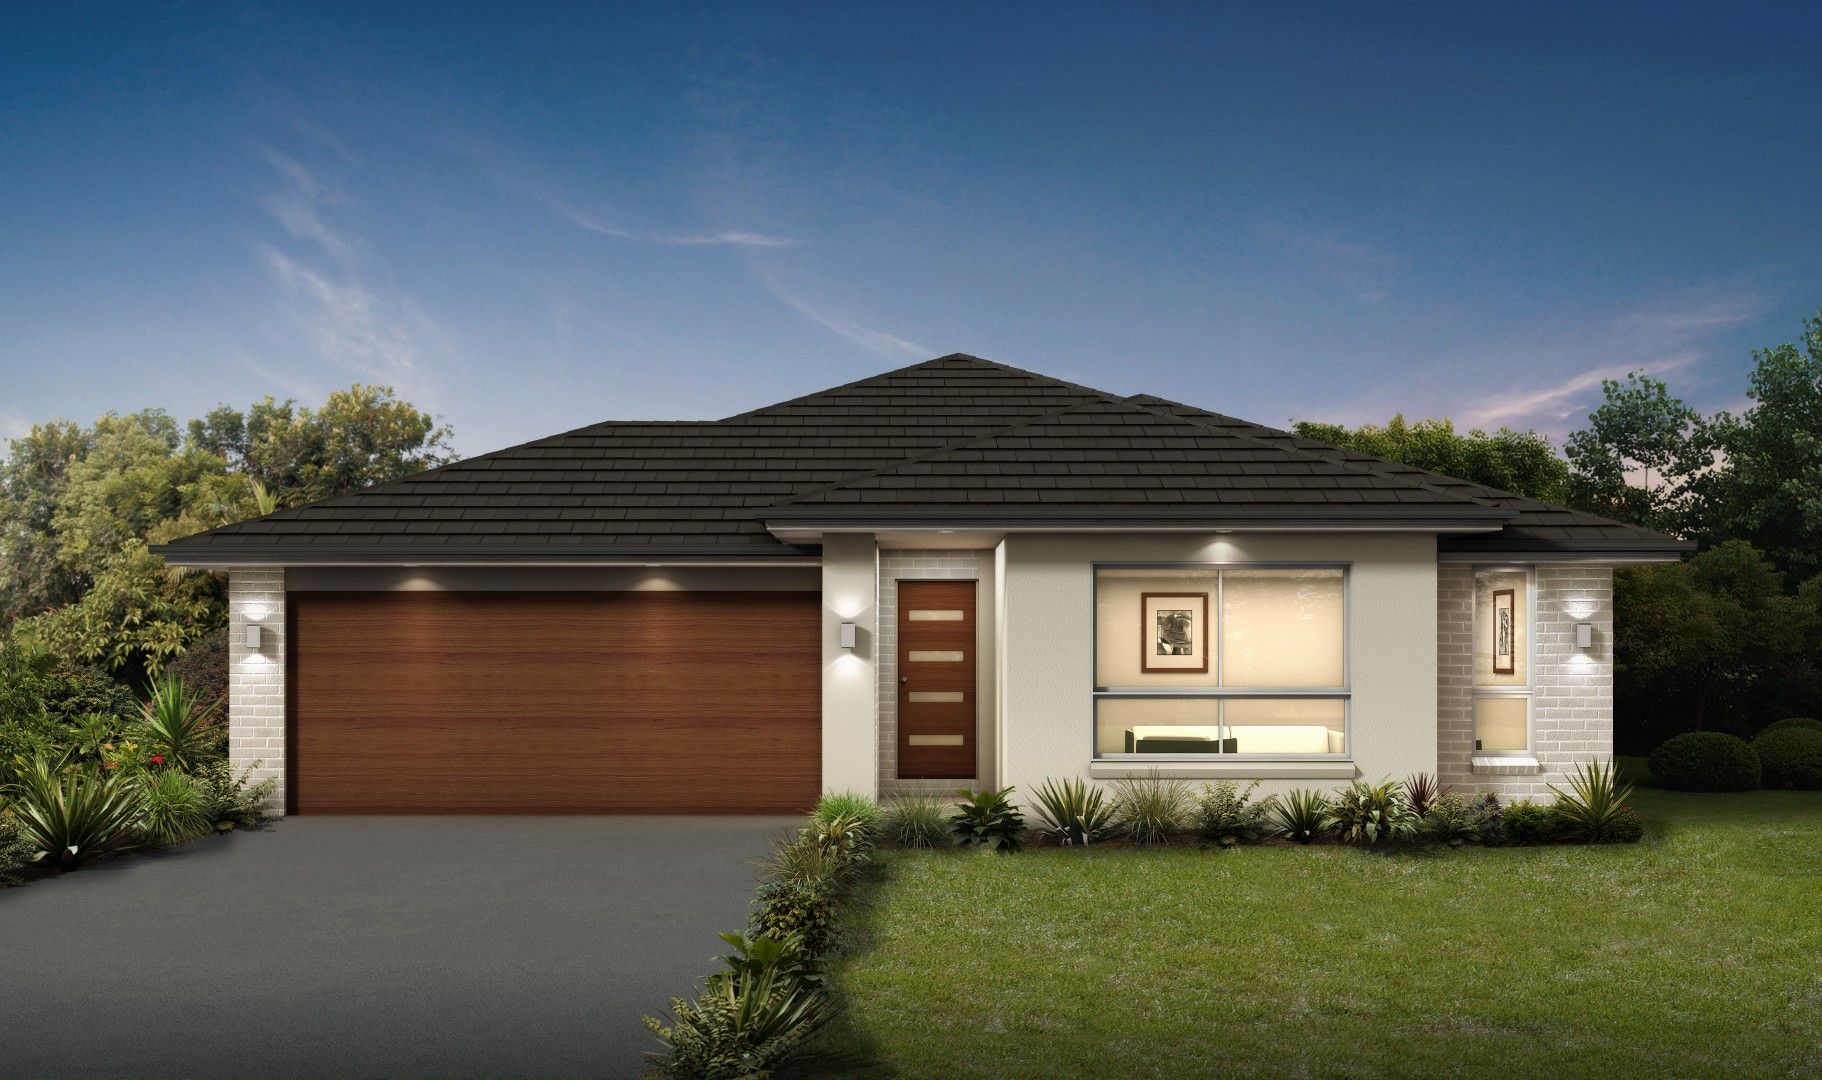 4 bedrooms New House & Land in Lot 21 Rinnana Place ST GEORGES BASIN NSW, 2540